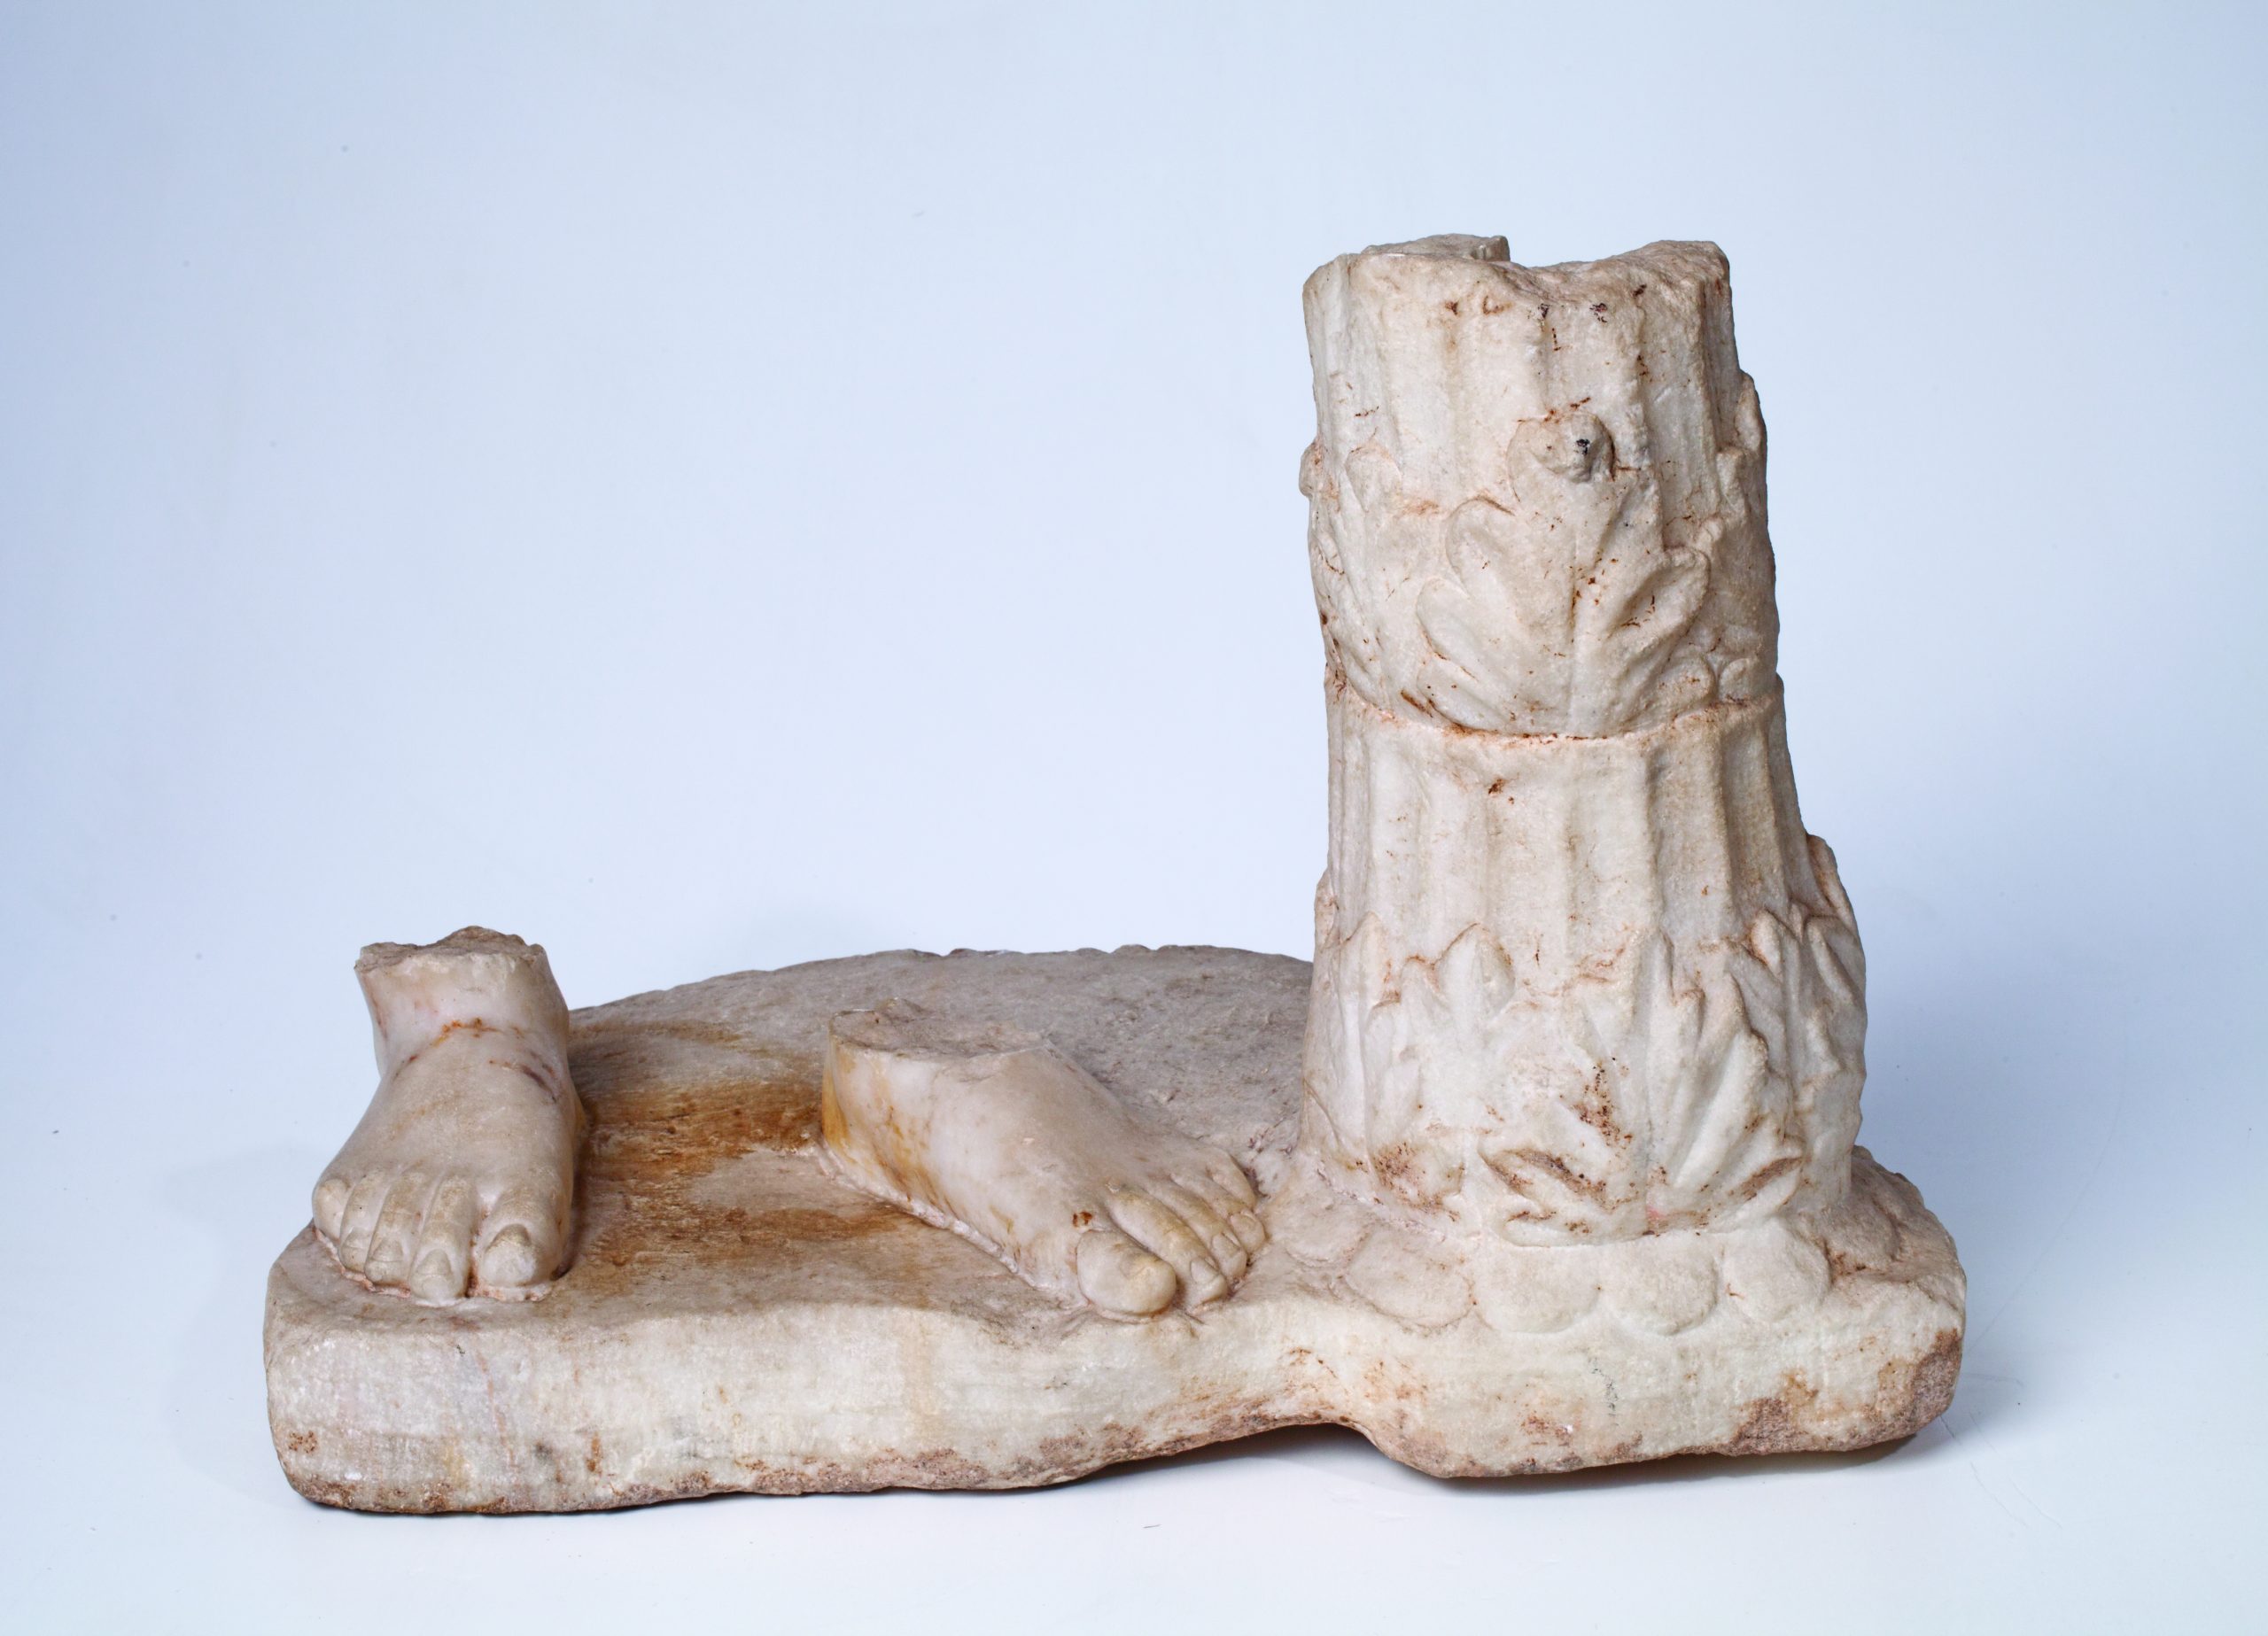 MARBLE PEDESTAL WITH A PAIR OF HUMAN FEET AND SUPPORT IN THE FORM OF A COLUMN, 34х20х4,5 cm dimensions, inv.no. 998/R